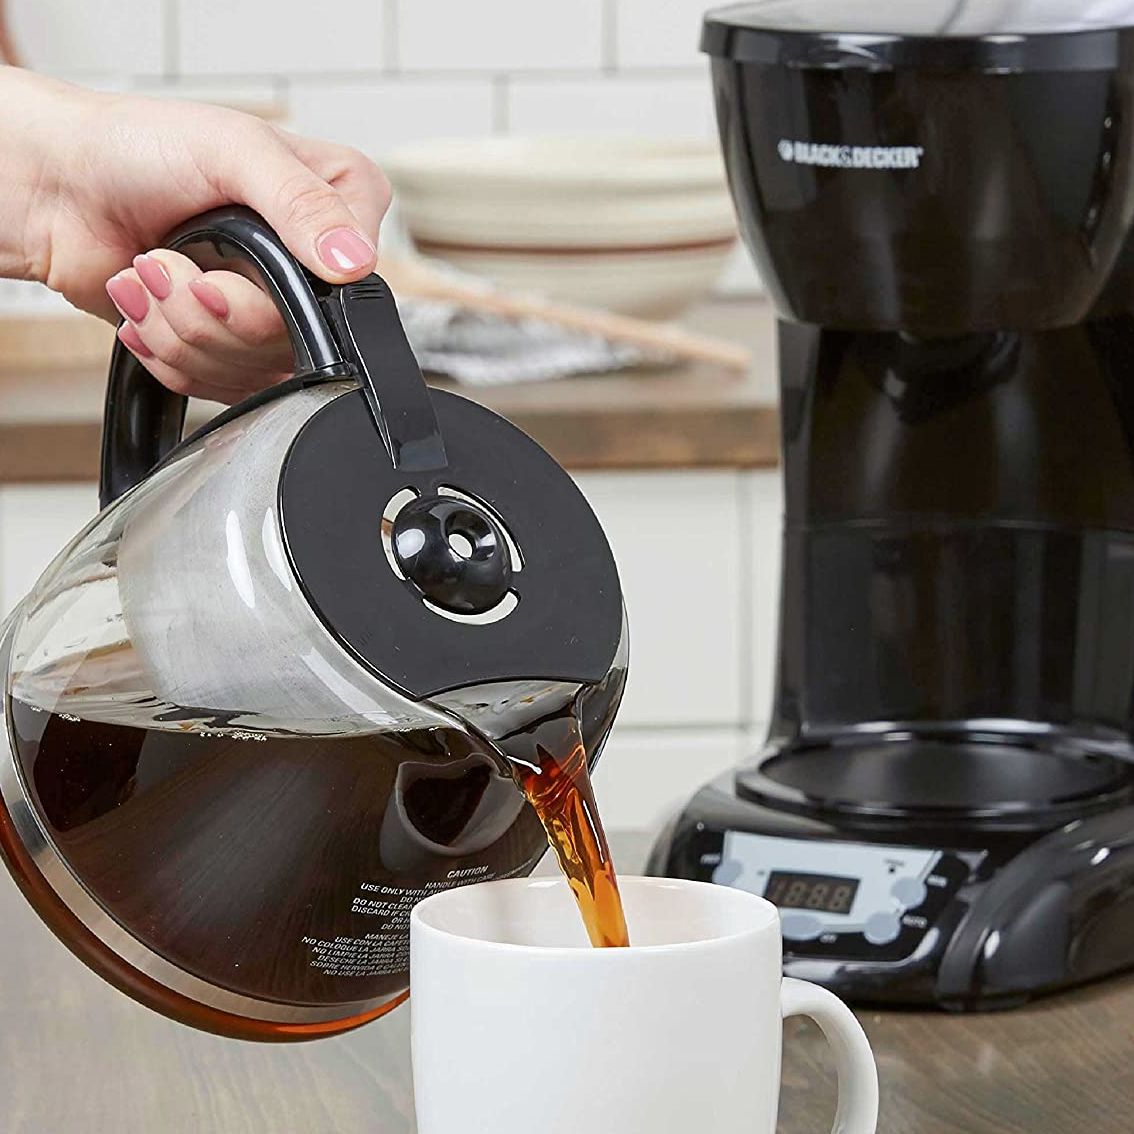 We've Brewed More Than 1,000 Cups to Find The Best Coffee Makers